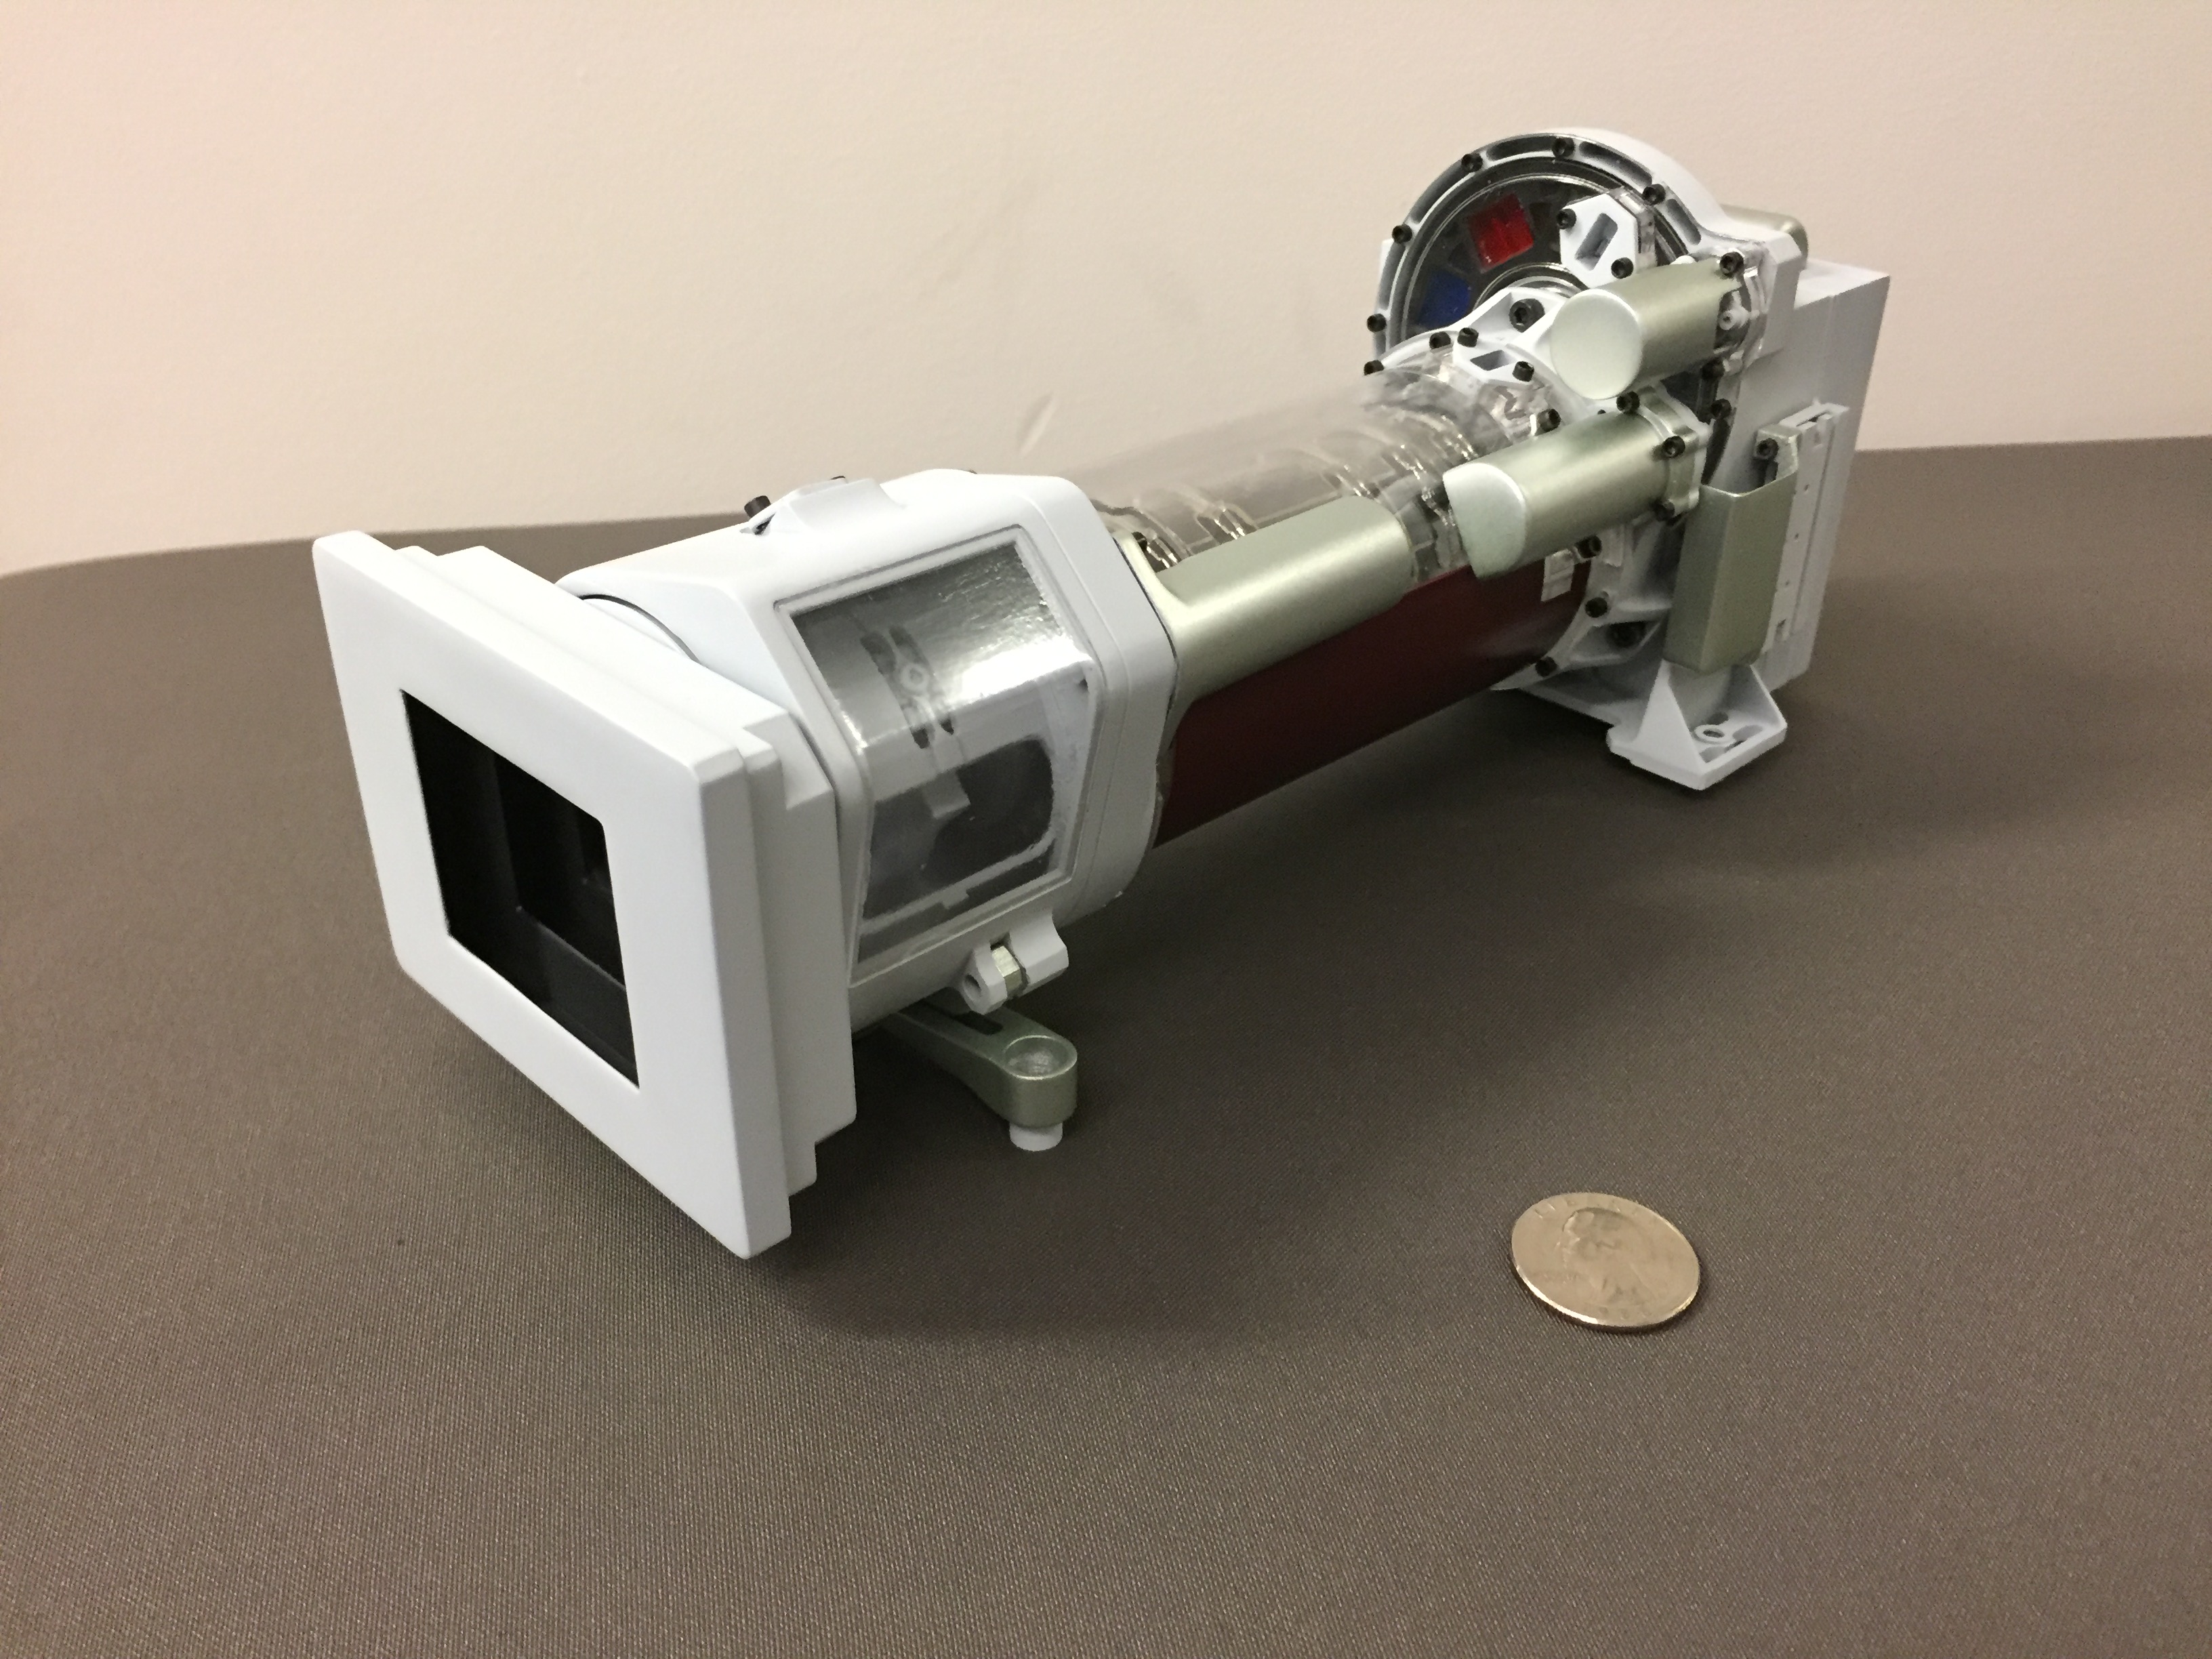 A 3-D printed model of Mastcam-Z, one of the science cameras on the Mars 2020 rover. Mastcam-Z will include a 3:1 zoom lens.